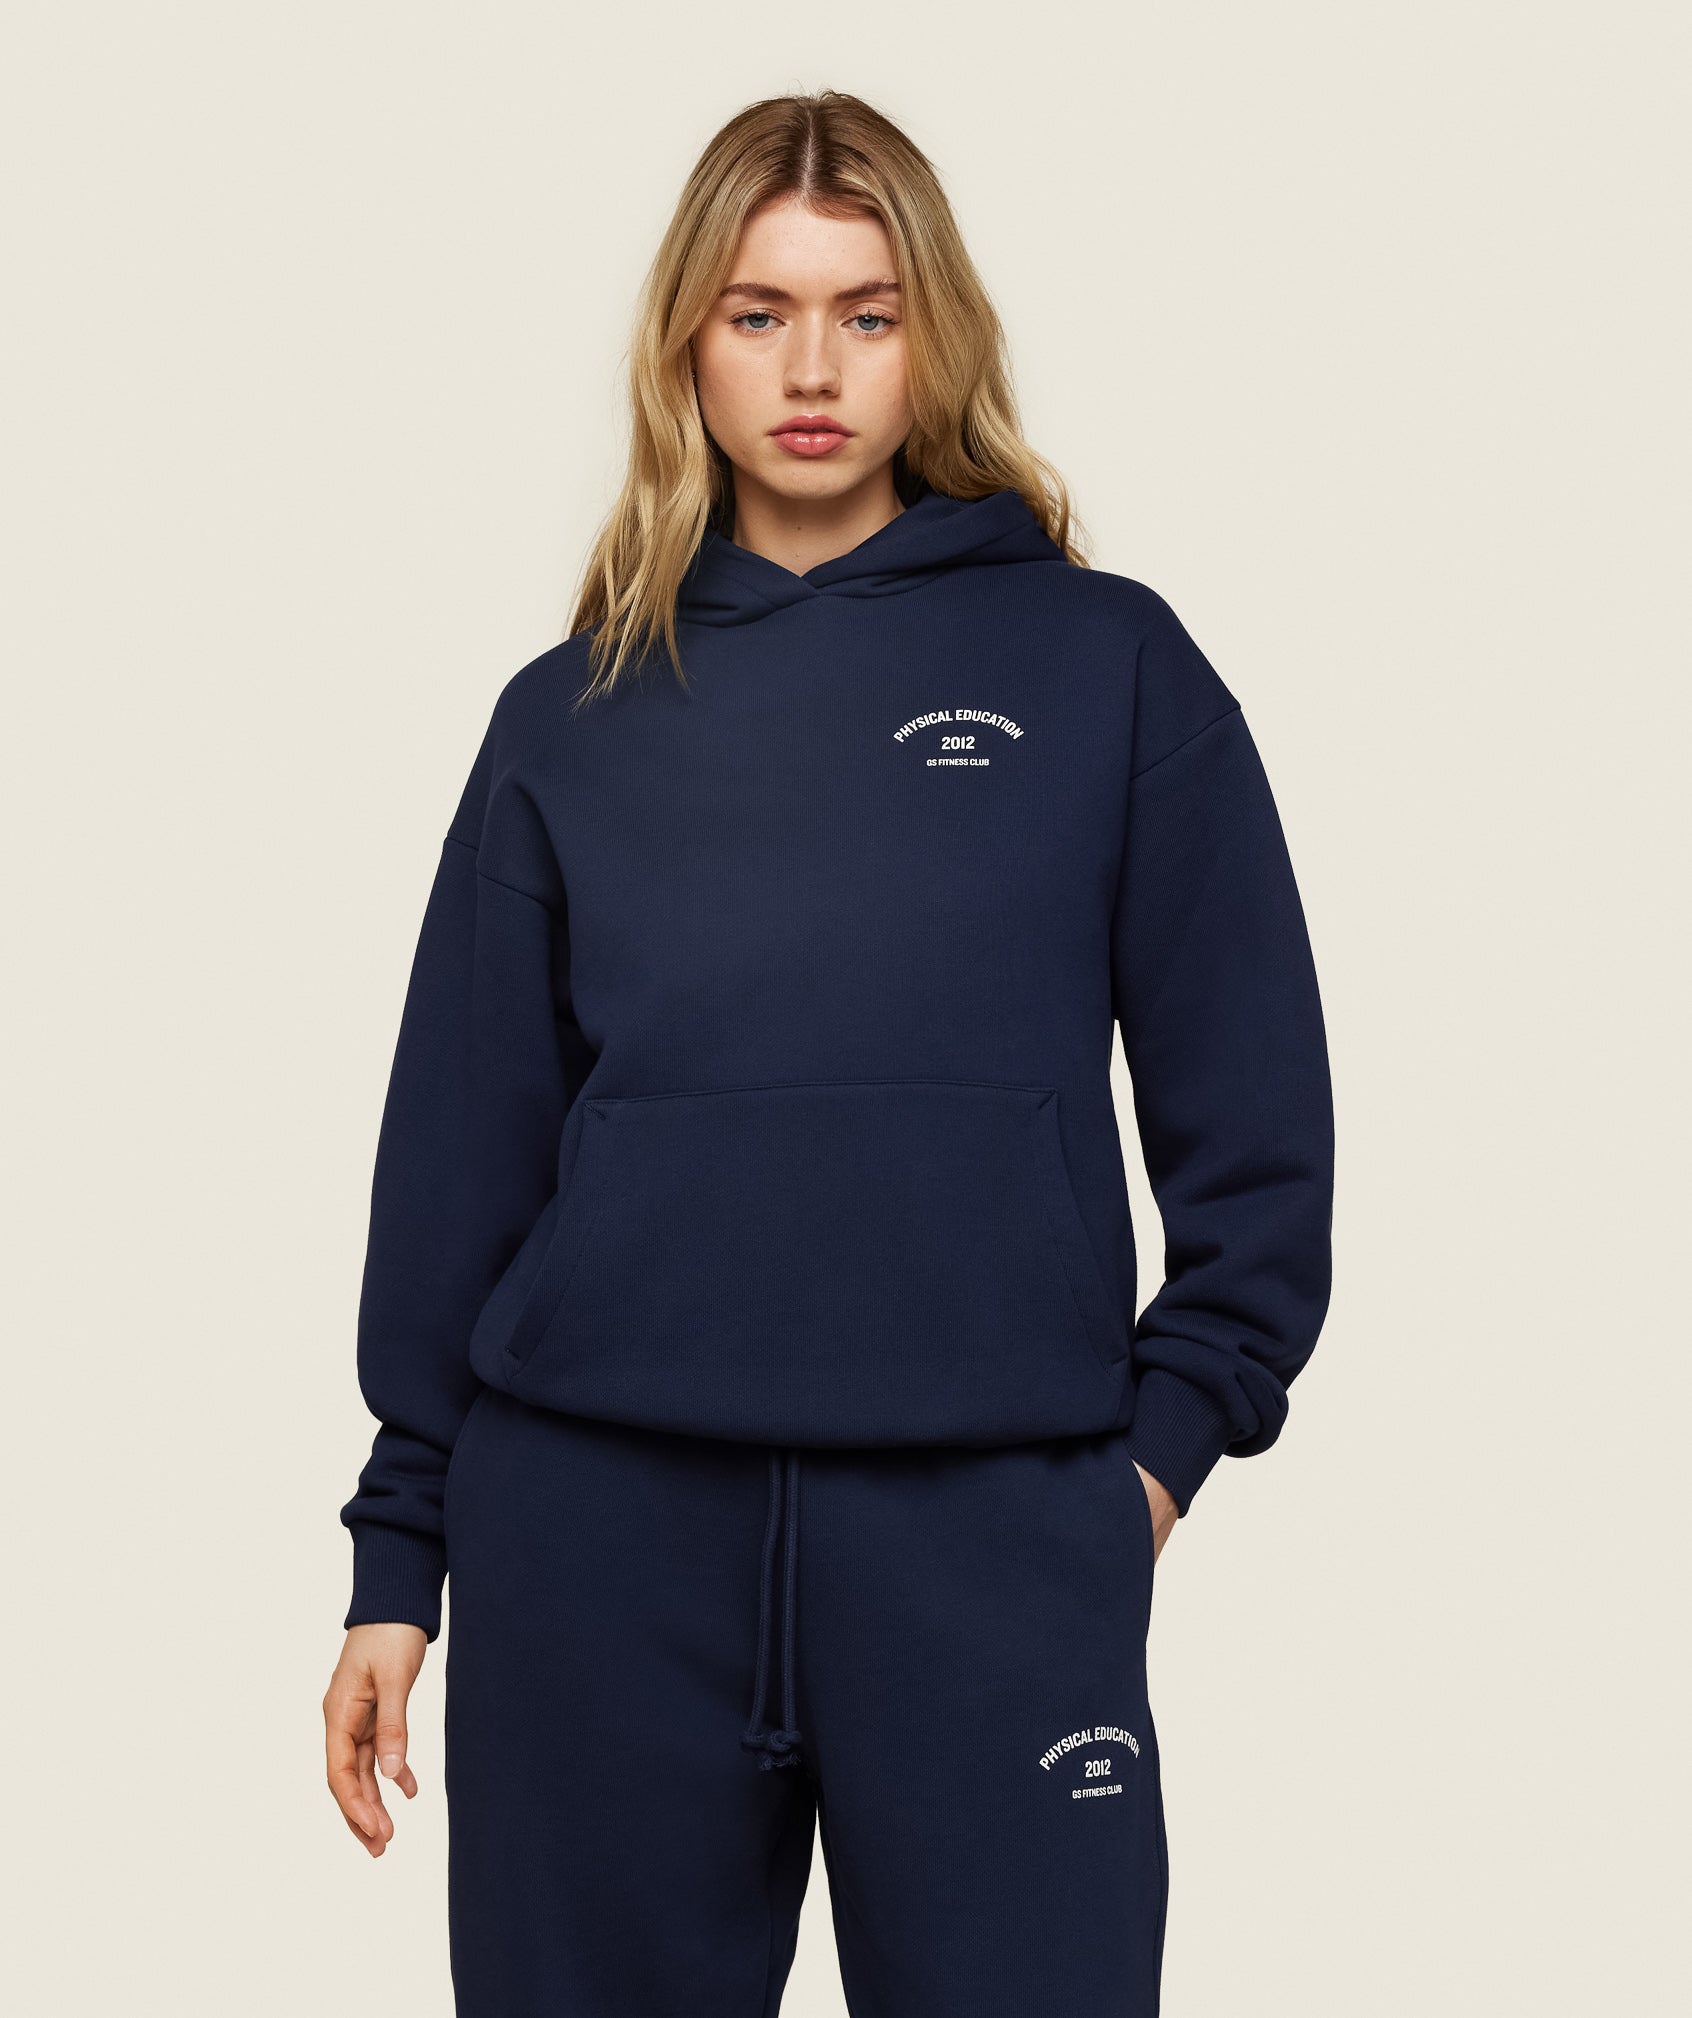 Phys Ed Graphic Hoodie in Blue - view 1